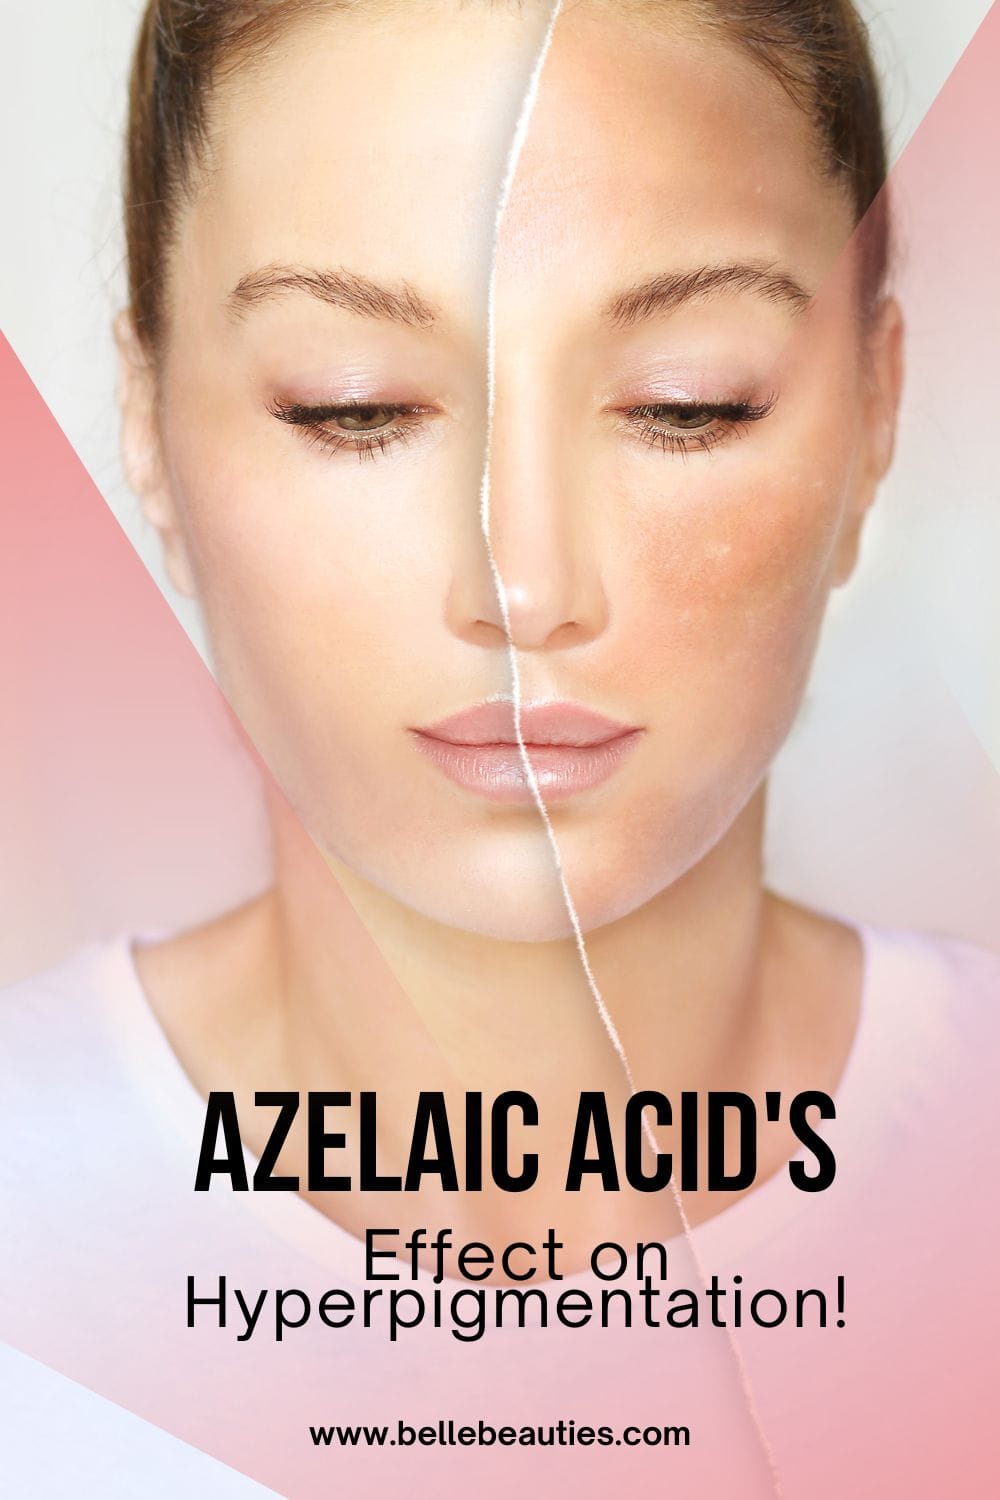 How Long Does Azelaic Acid Take to Work On Hyperpigmentation? pin